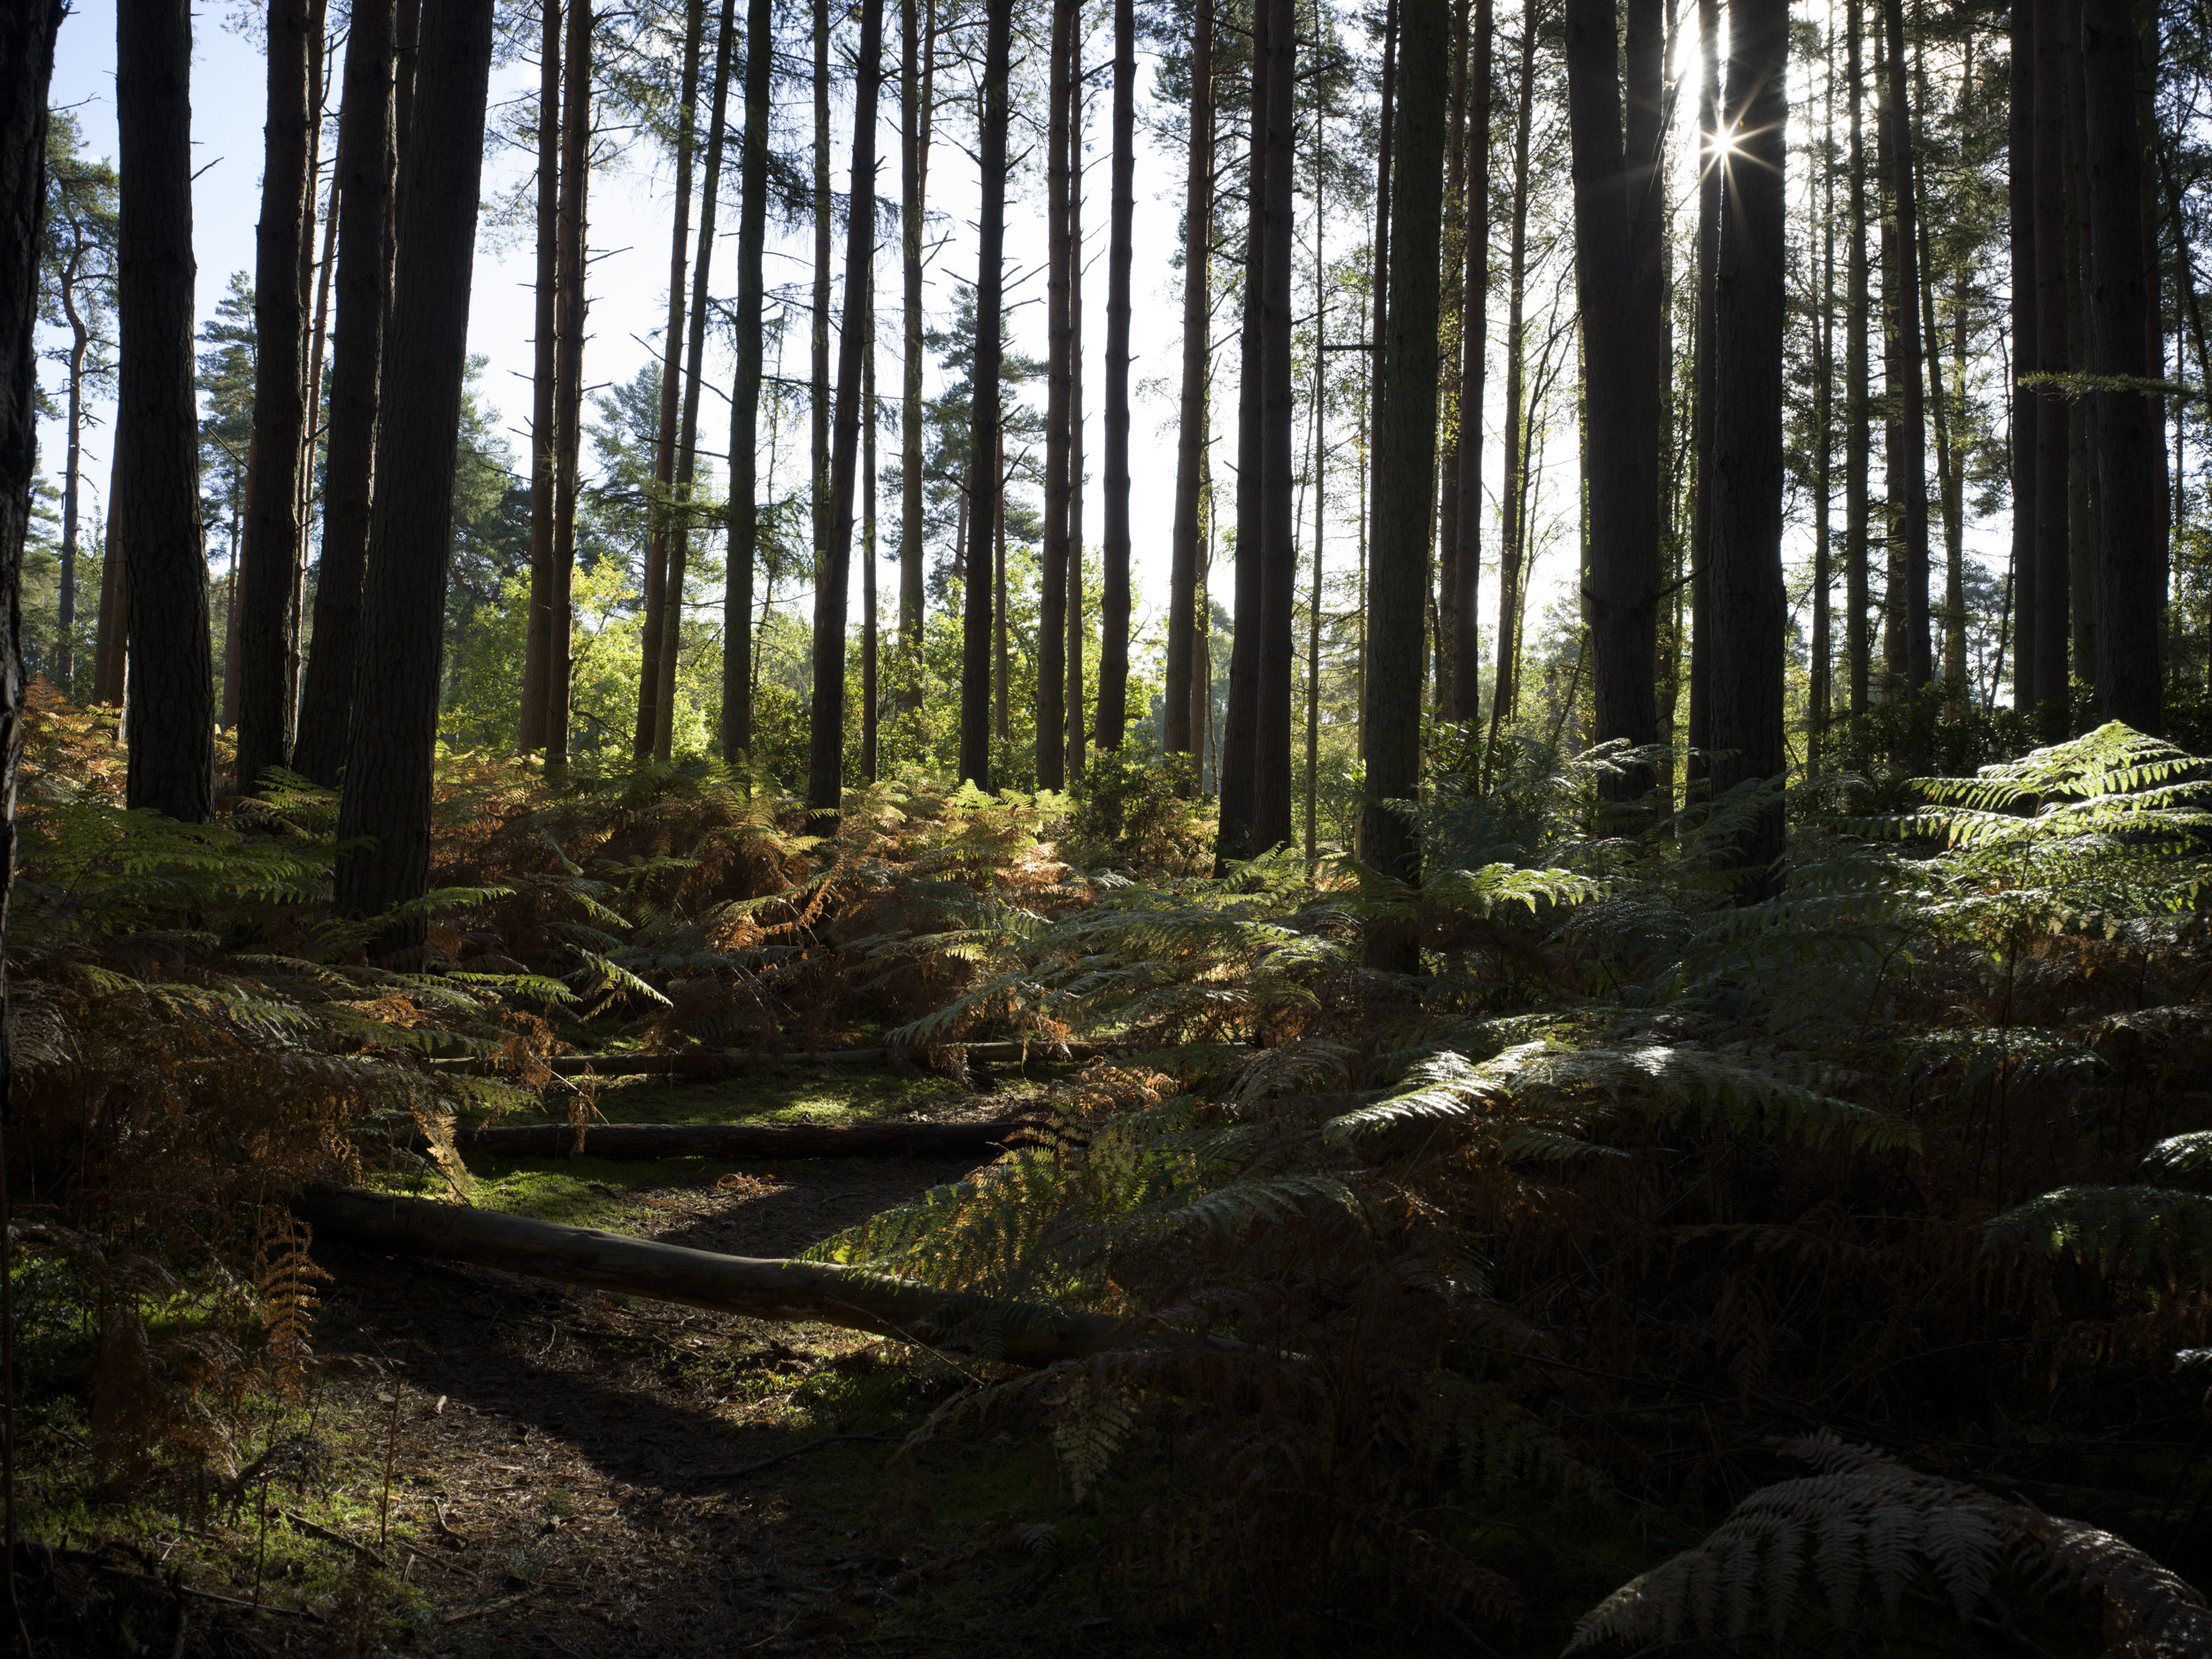 Sample image taken with the Hasselblad X2D 100C of a forest with sunstar